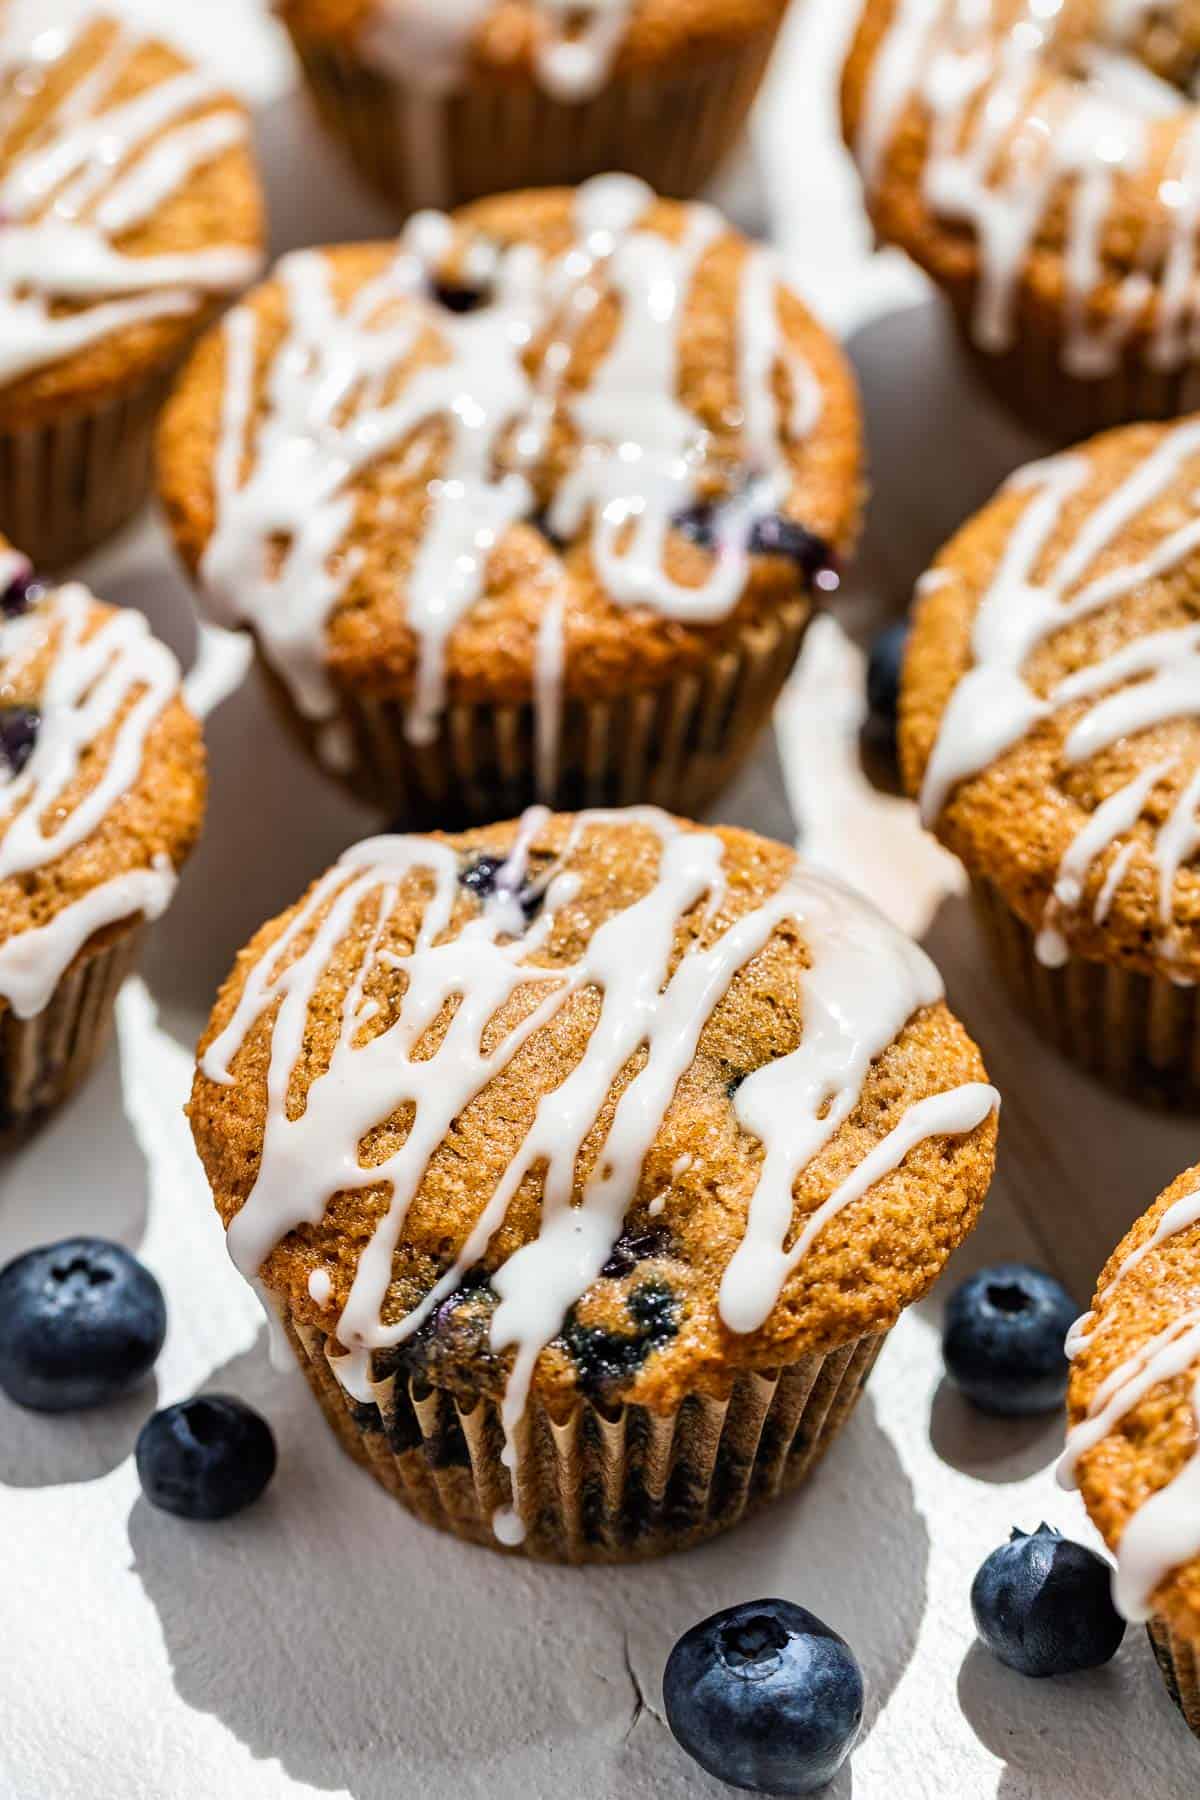 Glazed almond flour blueberry muffins on a white background with a few fresh blueberries on the side.